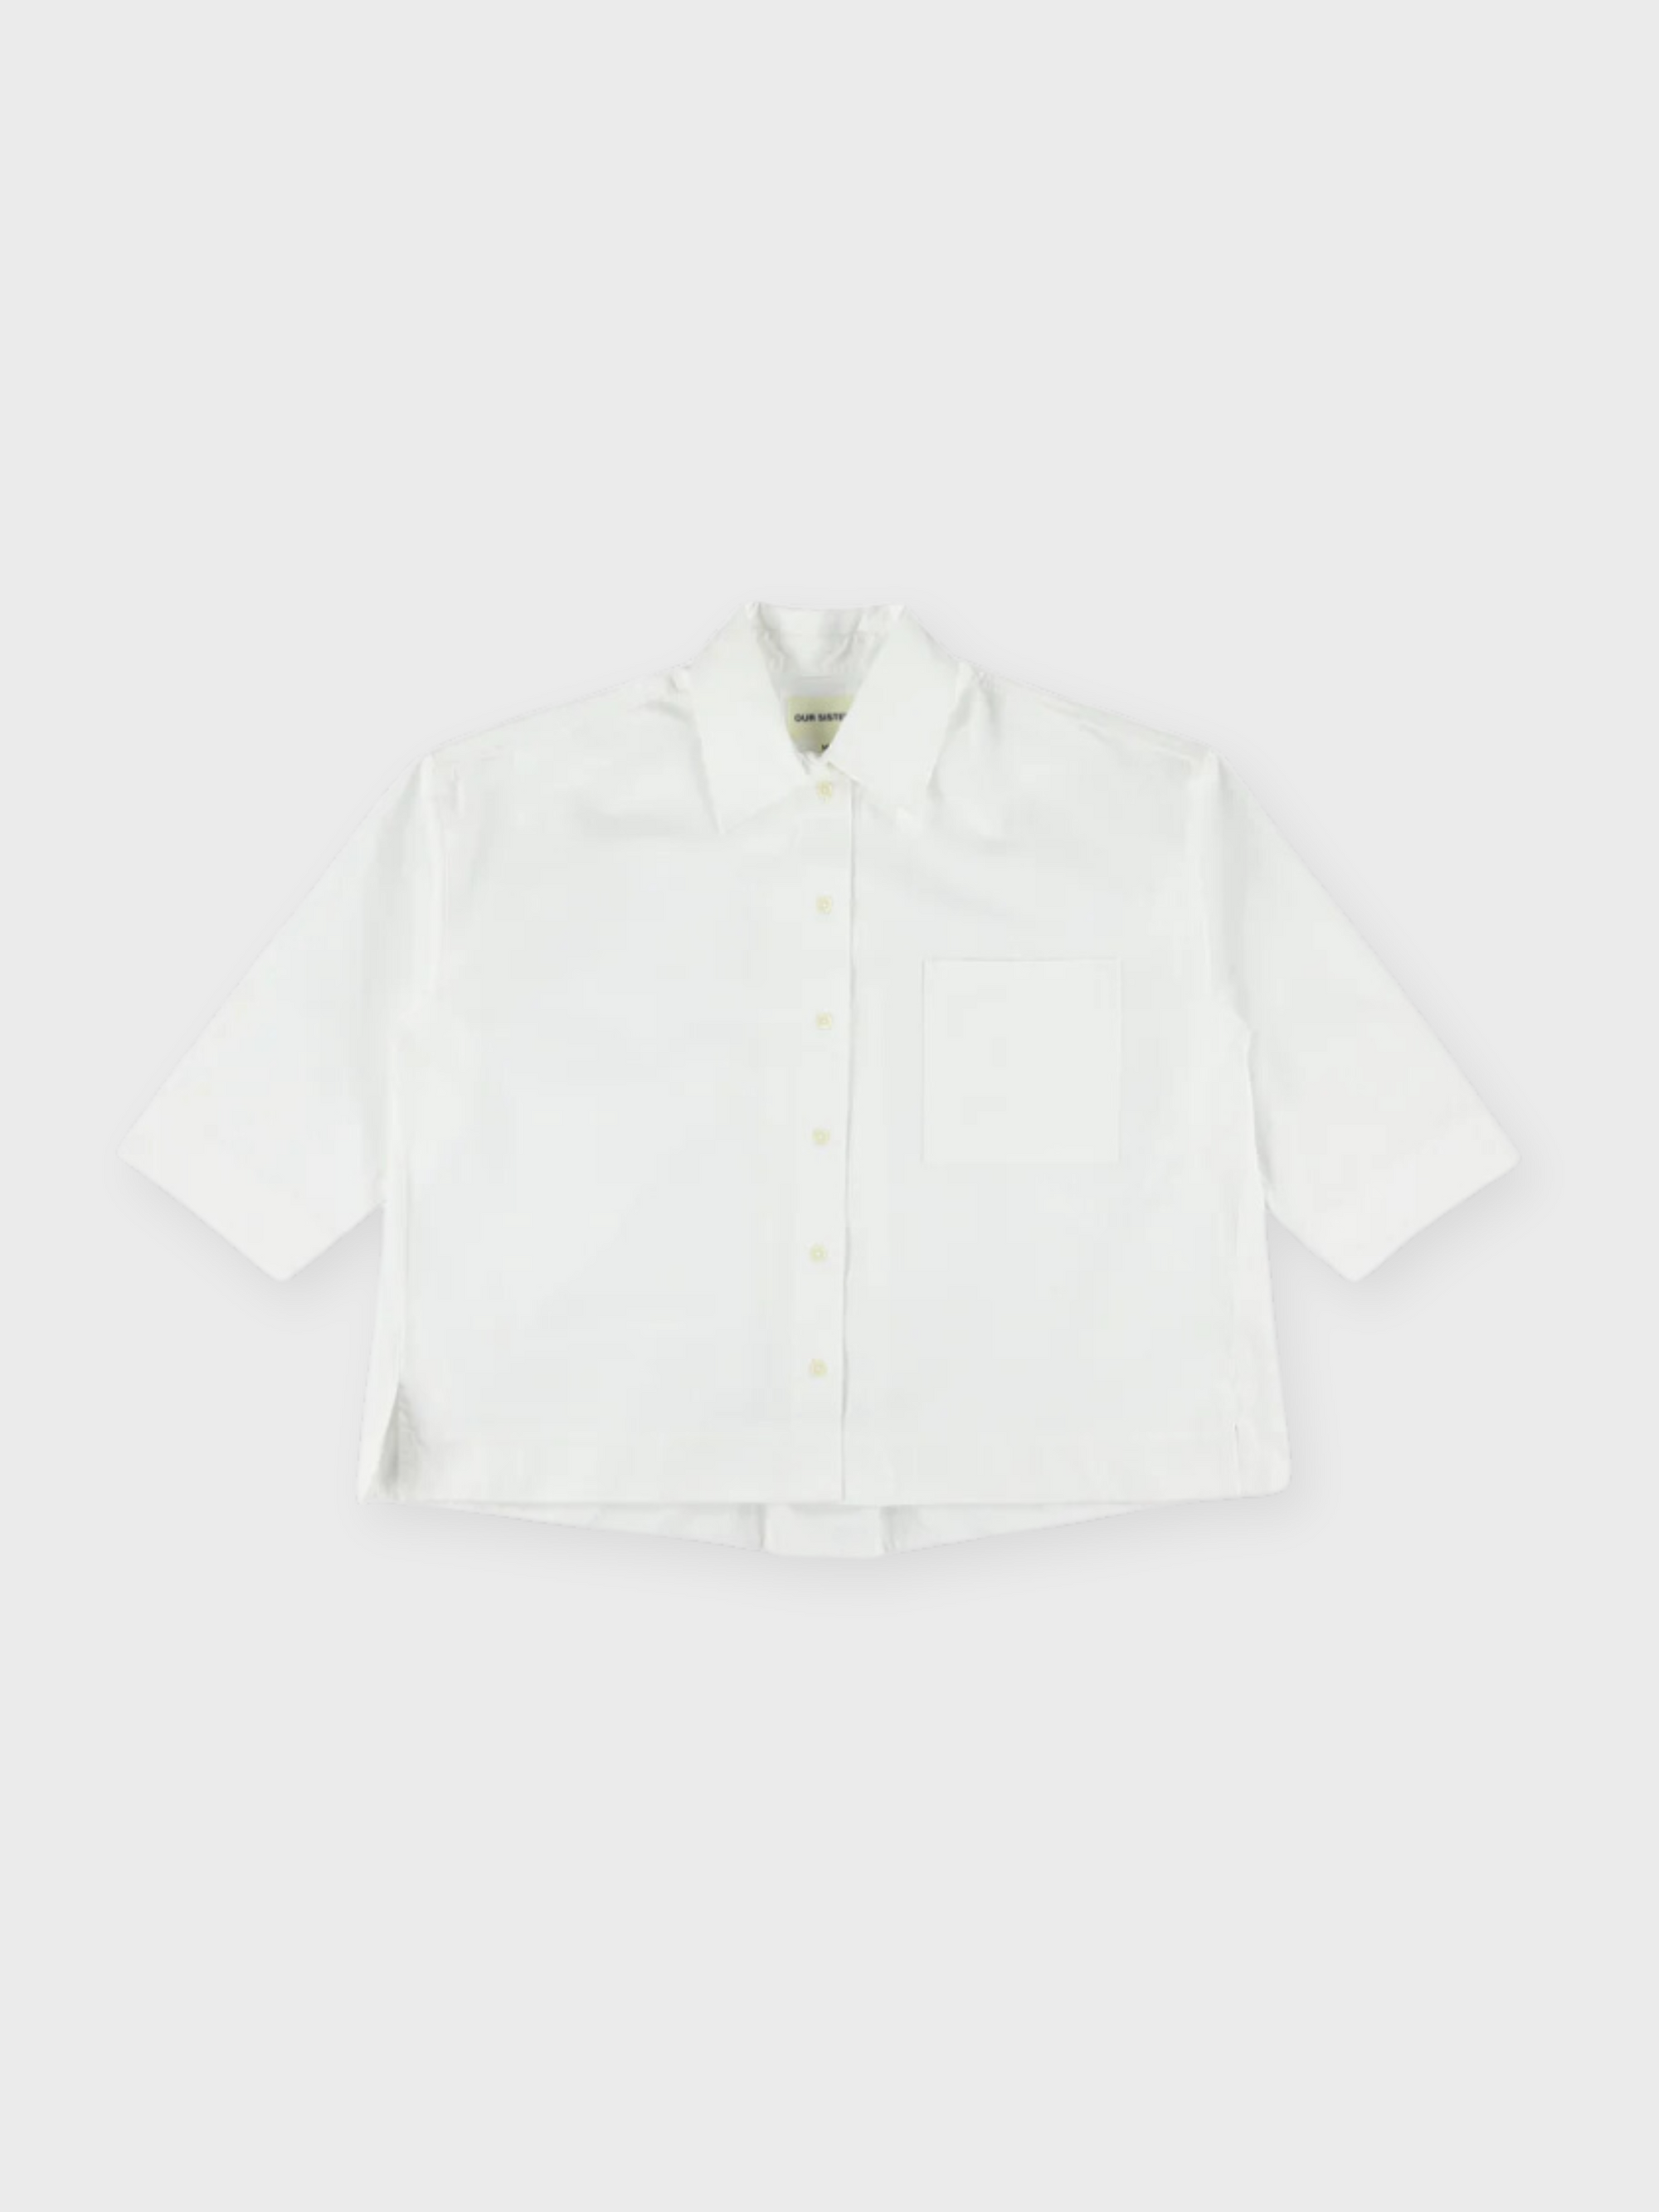 Our Sister Flyinghorse SS Button Up Off White-Shirts-XS-West of Woodward Boutique-Vancouver-Canada